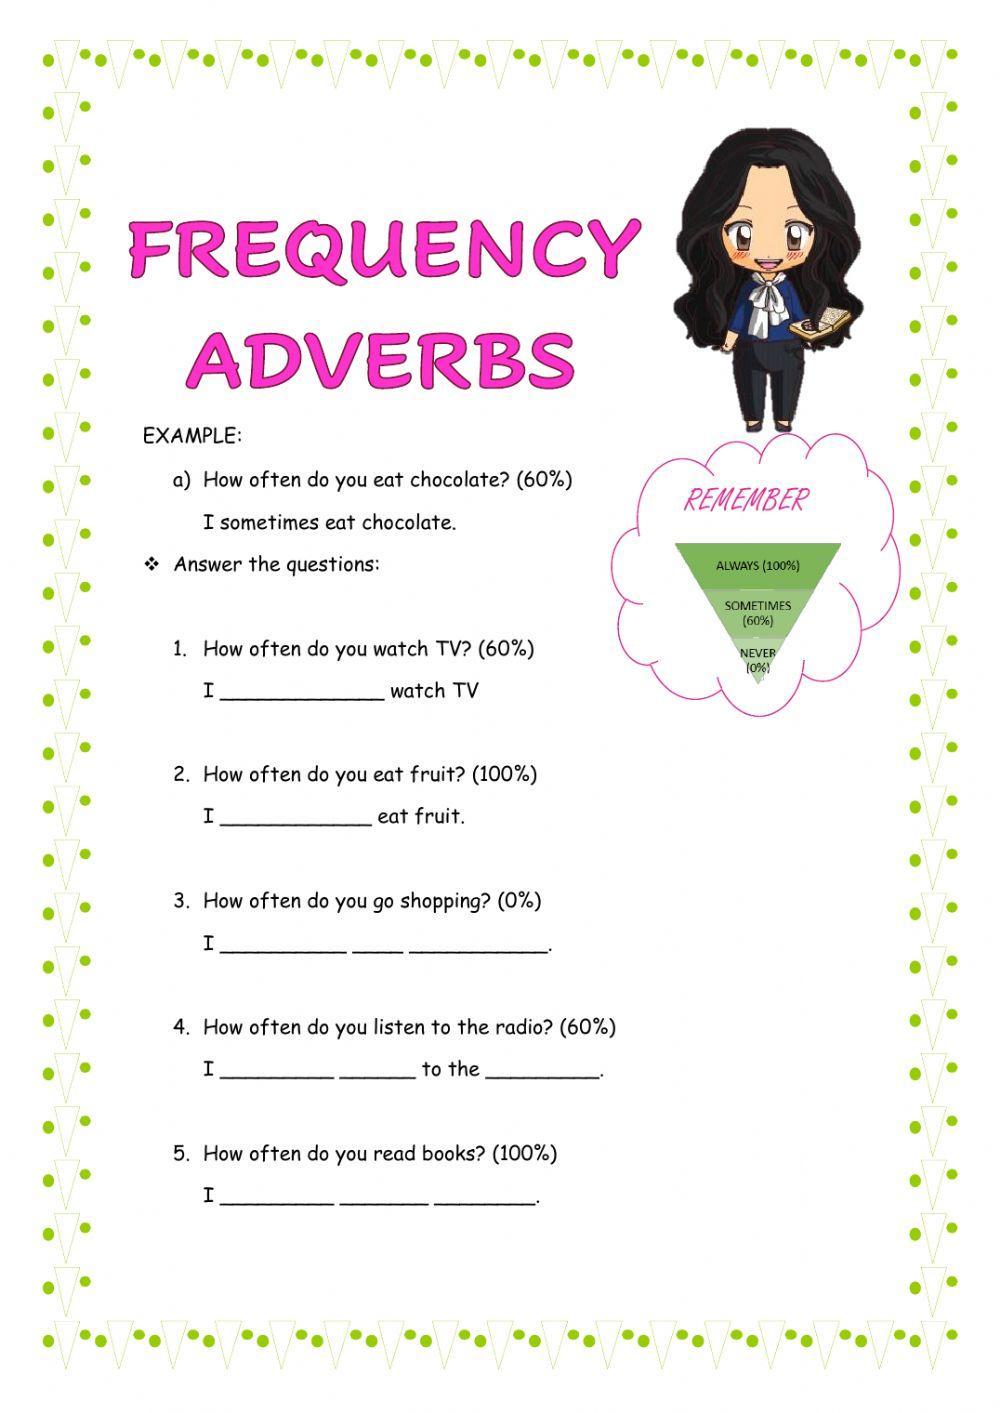 Frequency adeverbs